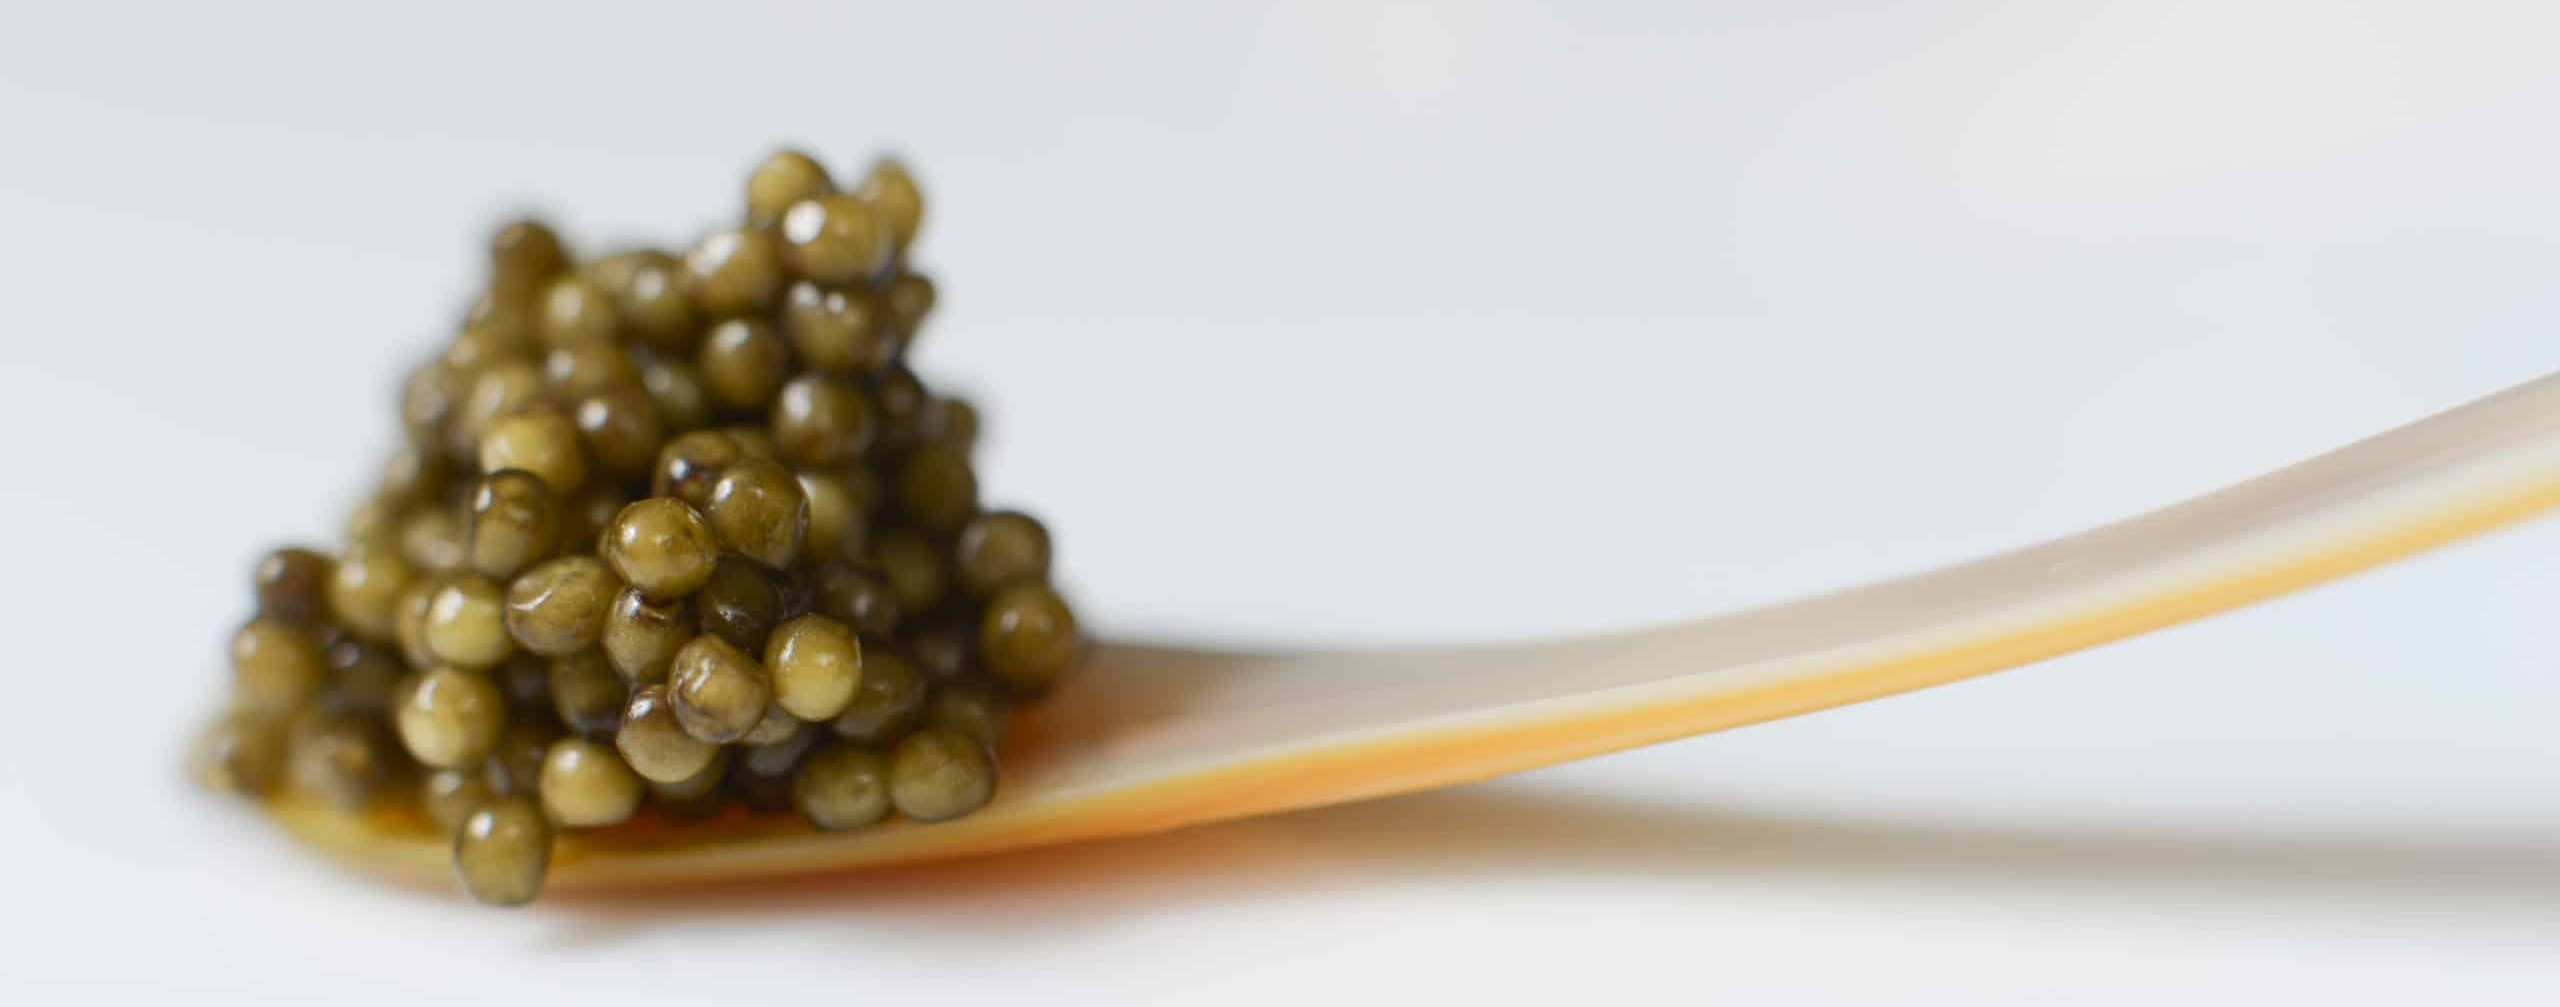 Imperial Caviar in a mother of pearl spoon